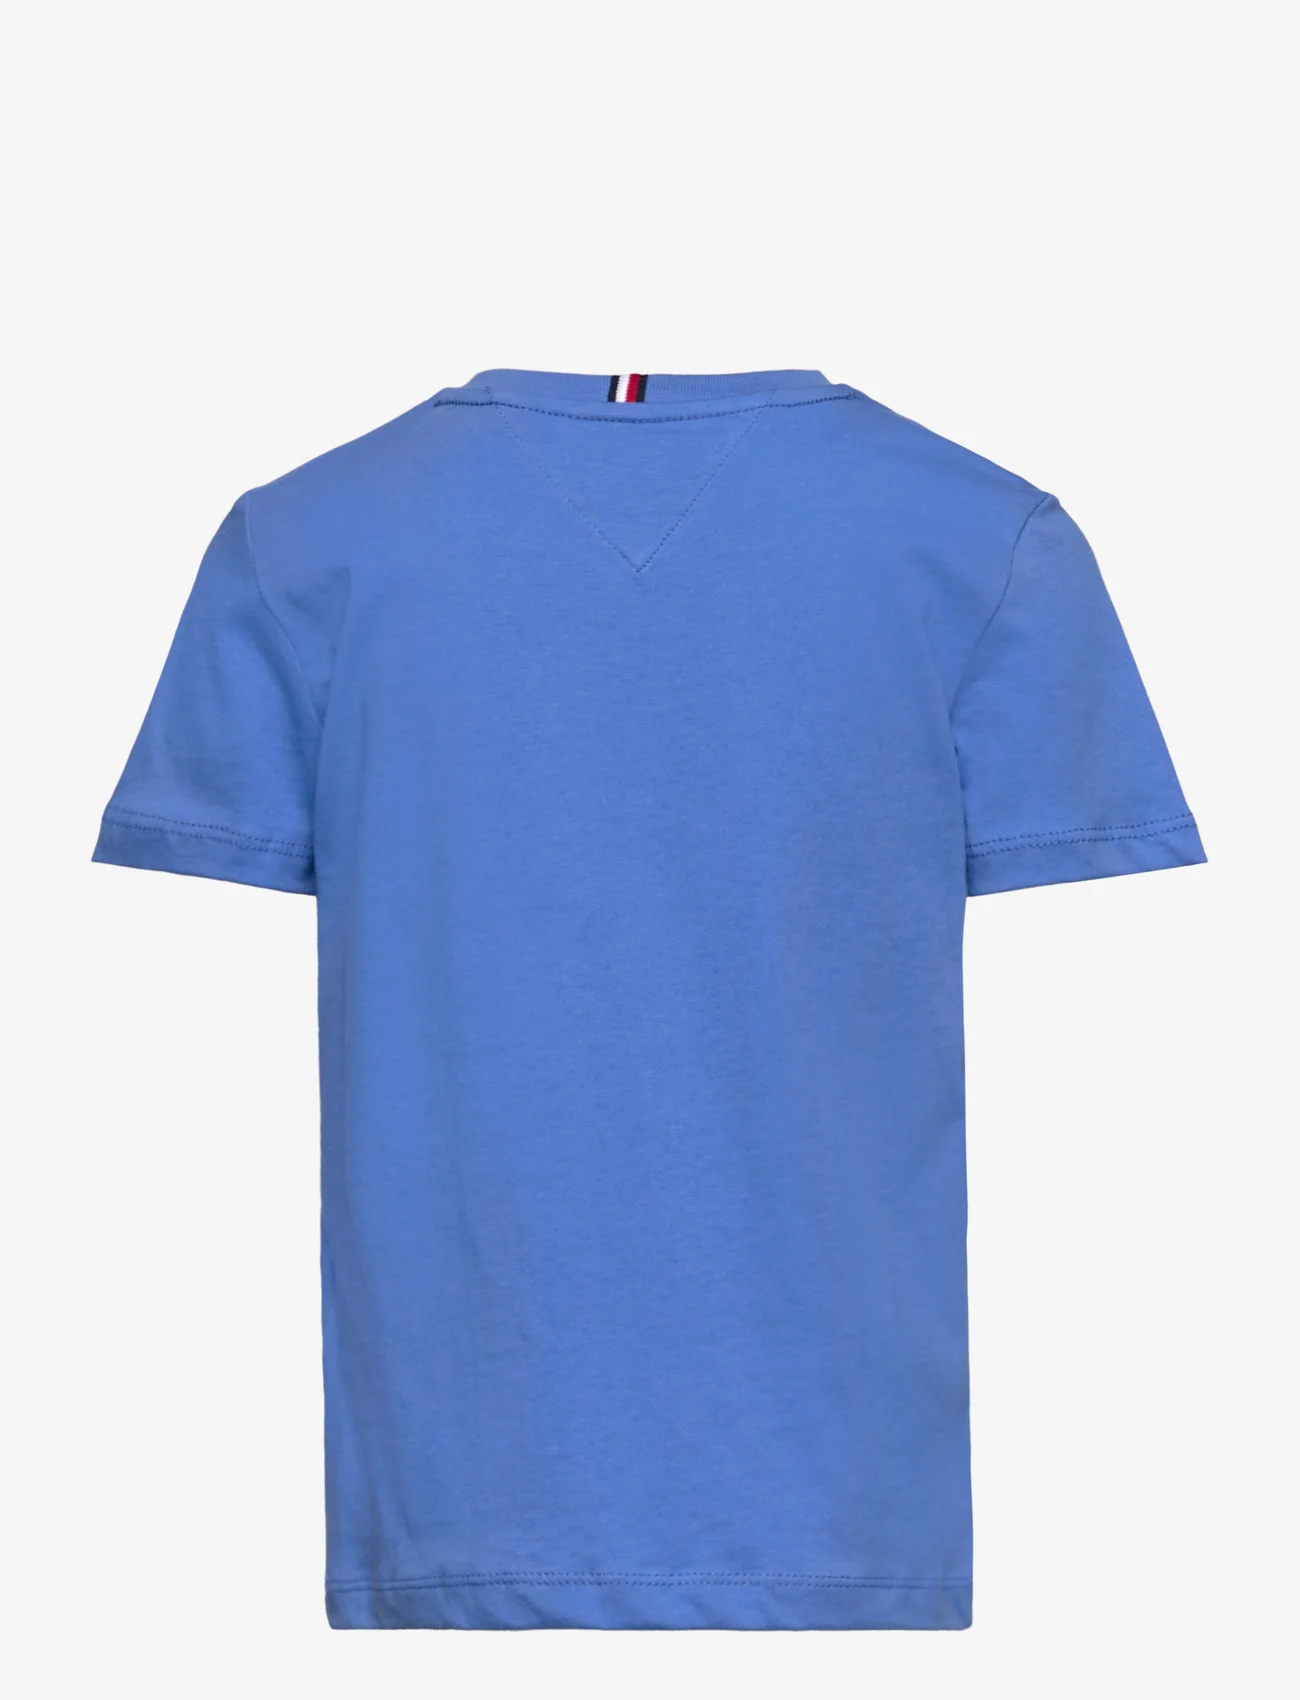 Tommy Hilfiger - TH LOGO TEE S/S - lyhythihaiset t-paidat - blue spell - 1